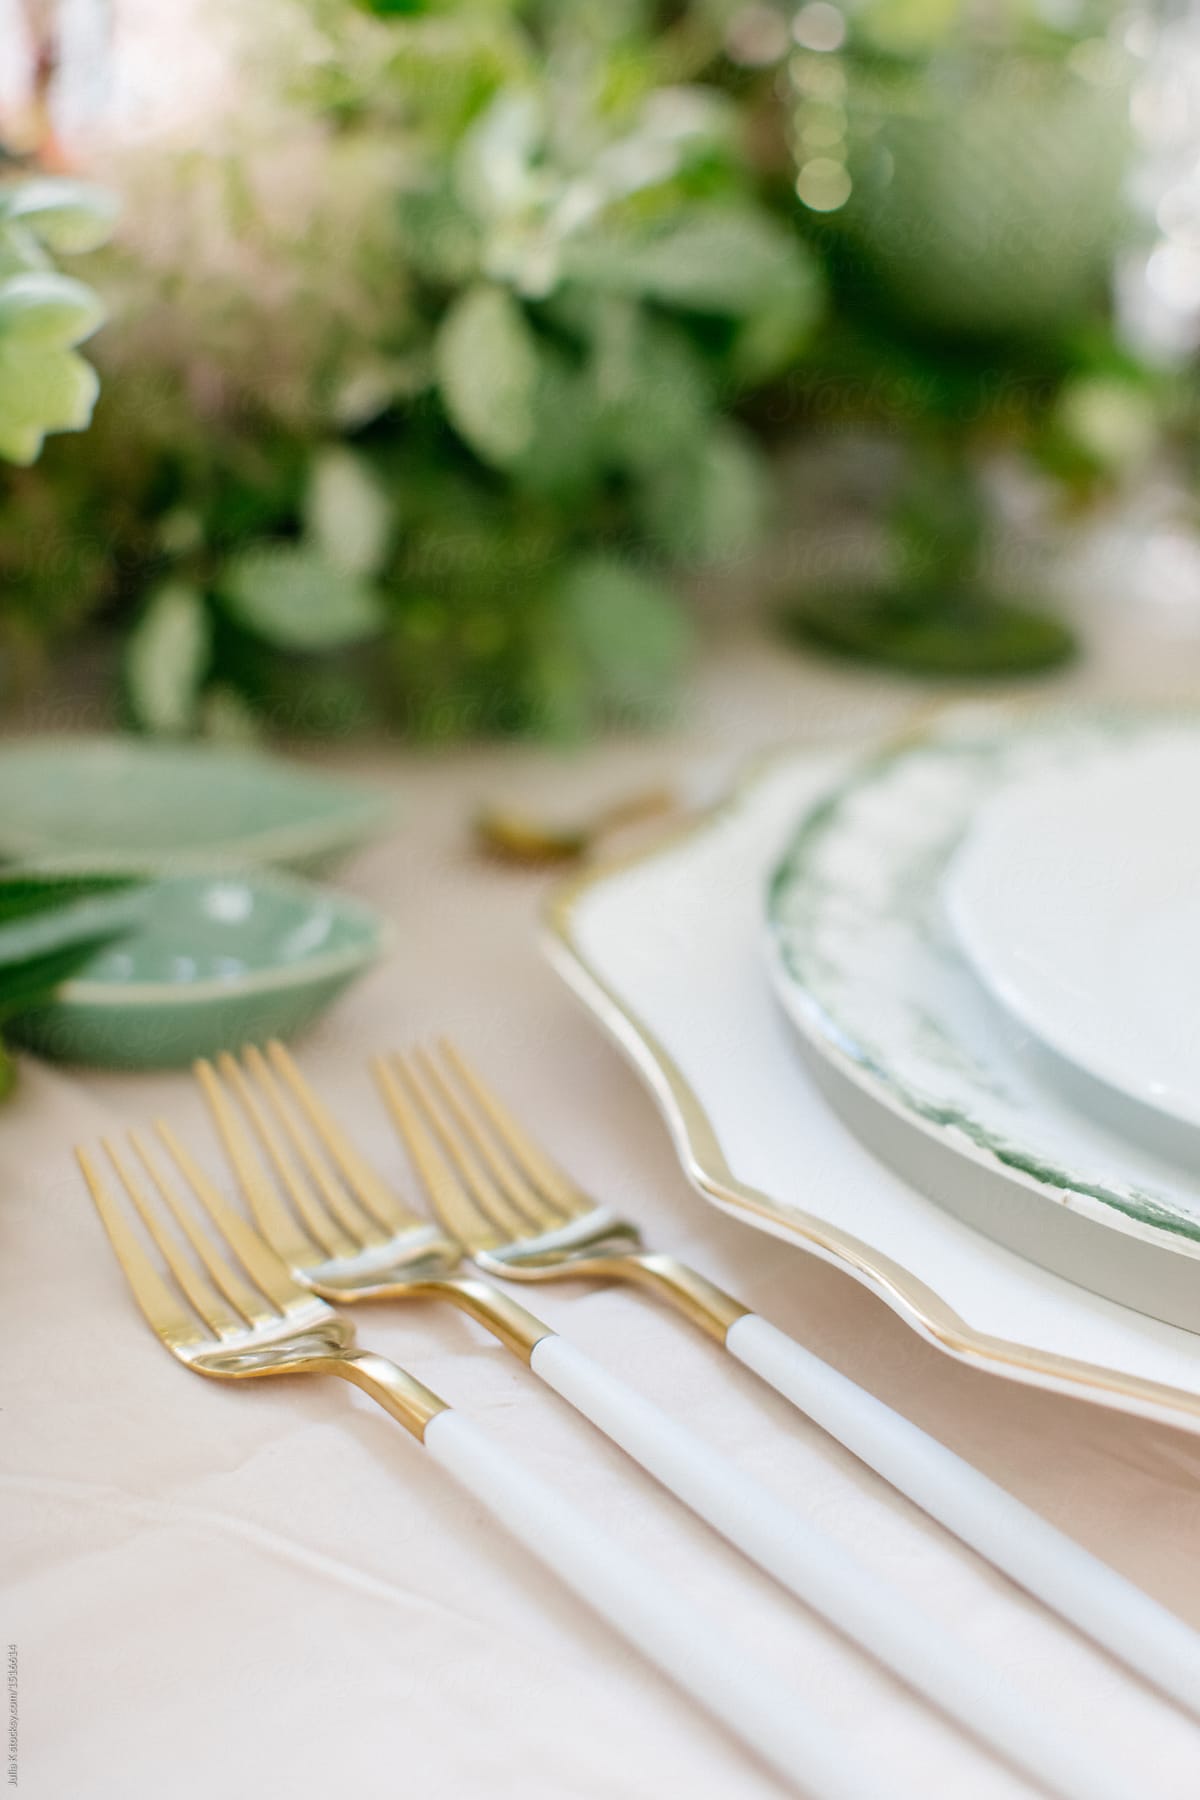 Gold silverware on table